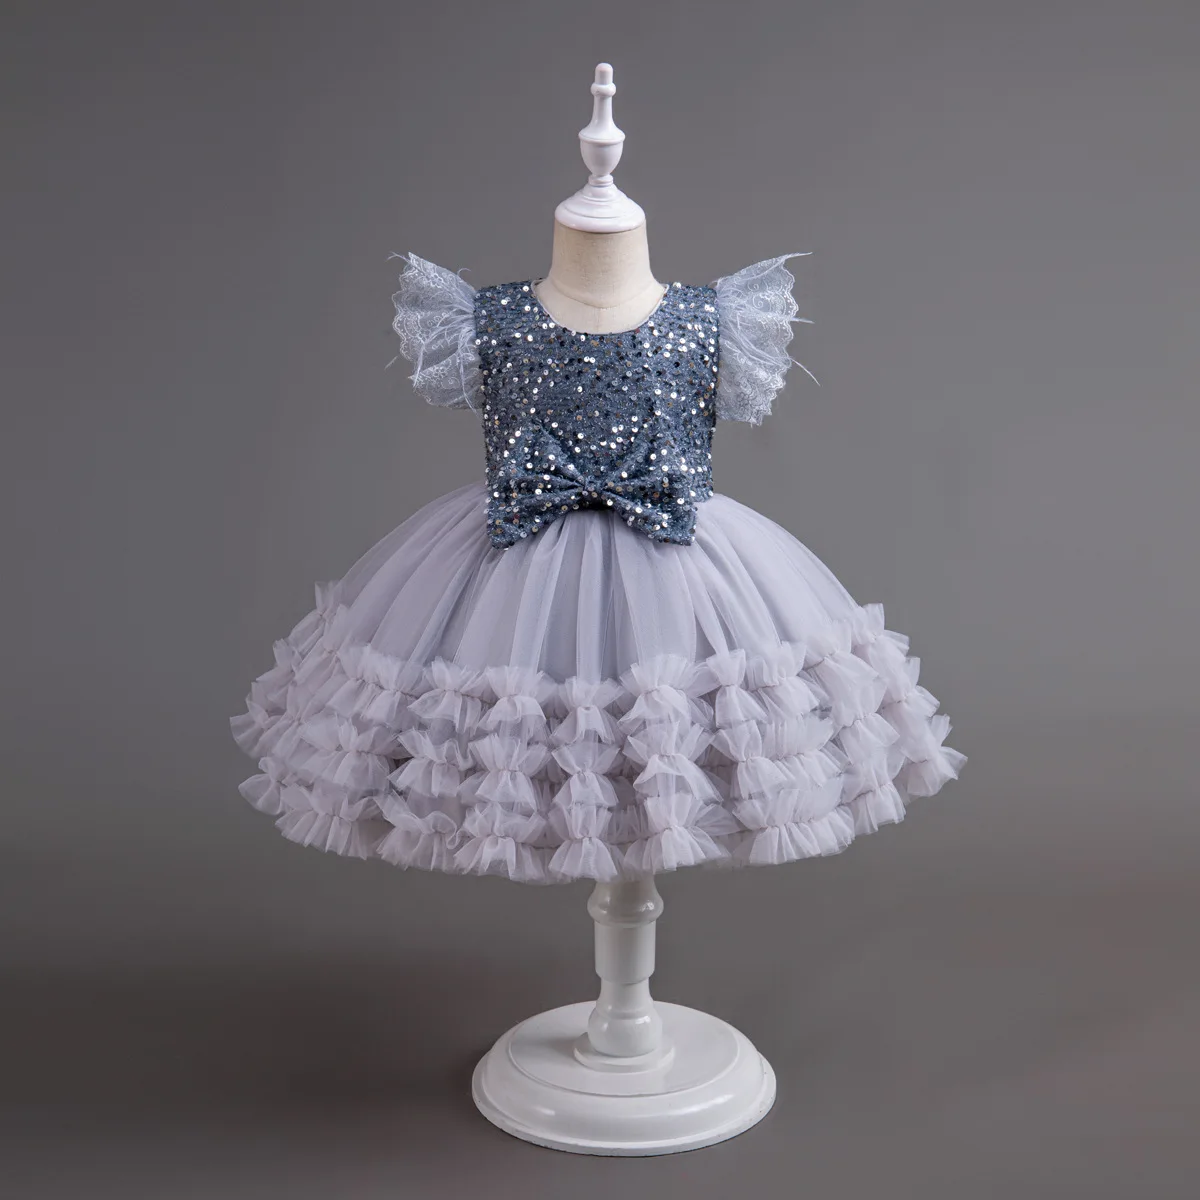 

HETISO Girls Party Dresses Sequins Tutu Baby Birthday Wedding Formal Ball Gown Lace Sleeve Kids Princess Formal Dress 6 8 10T